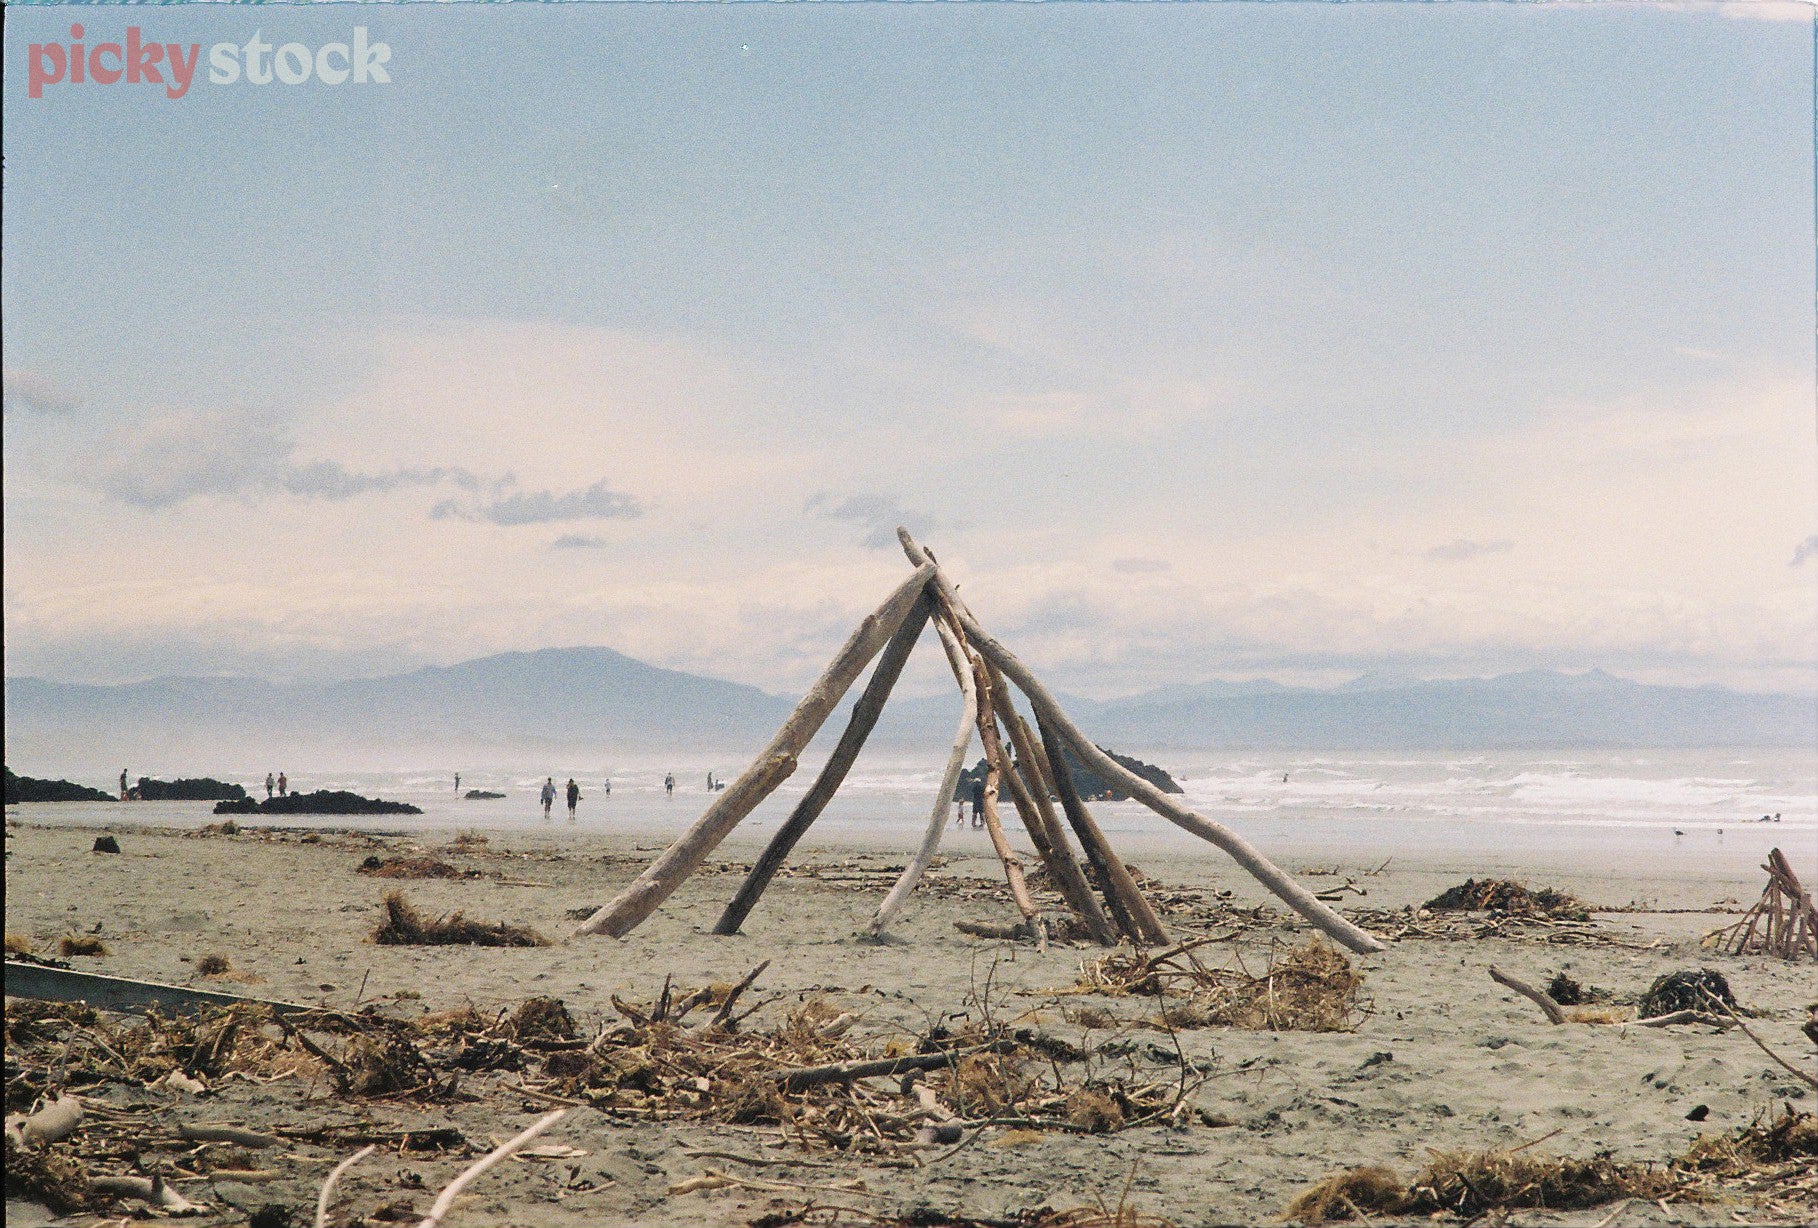 Makeshift teepee is made from large driftwood peices on a beach surrounded by debris. 